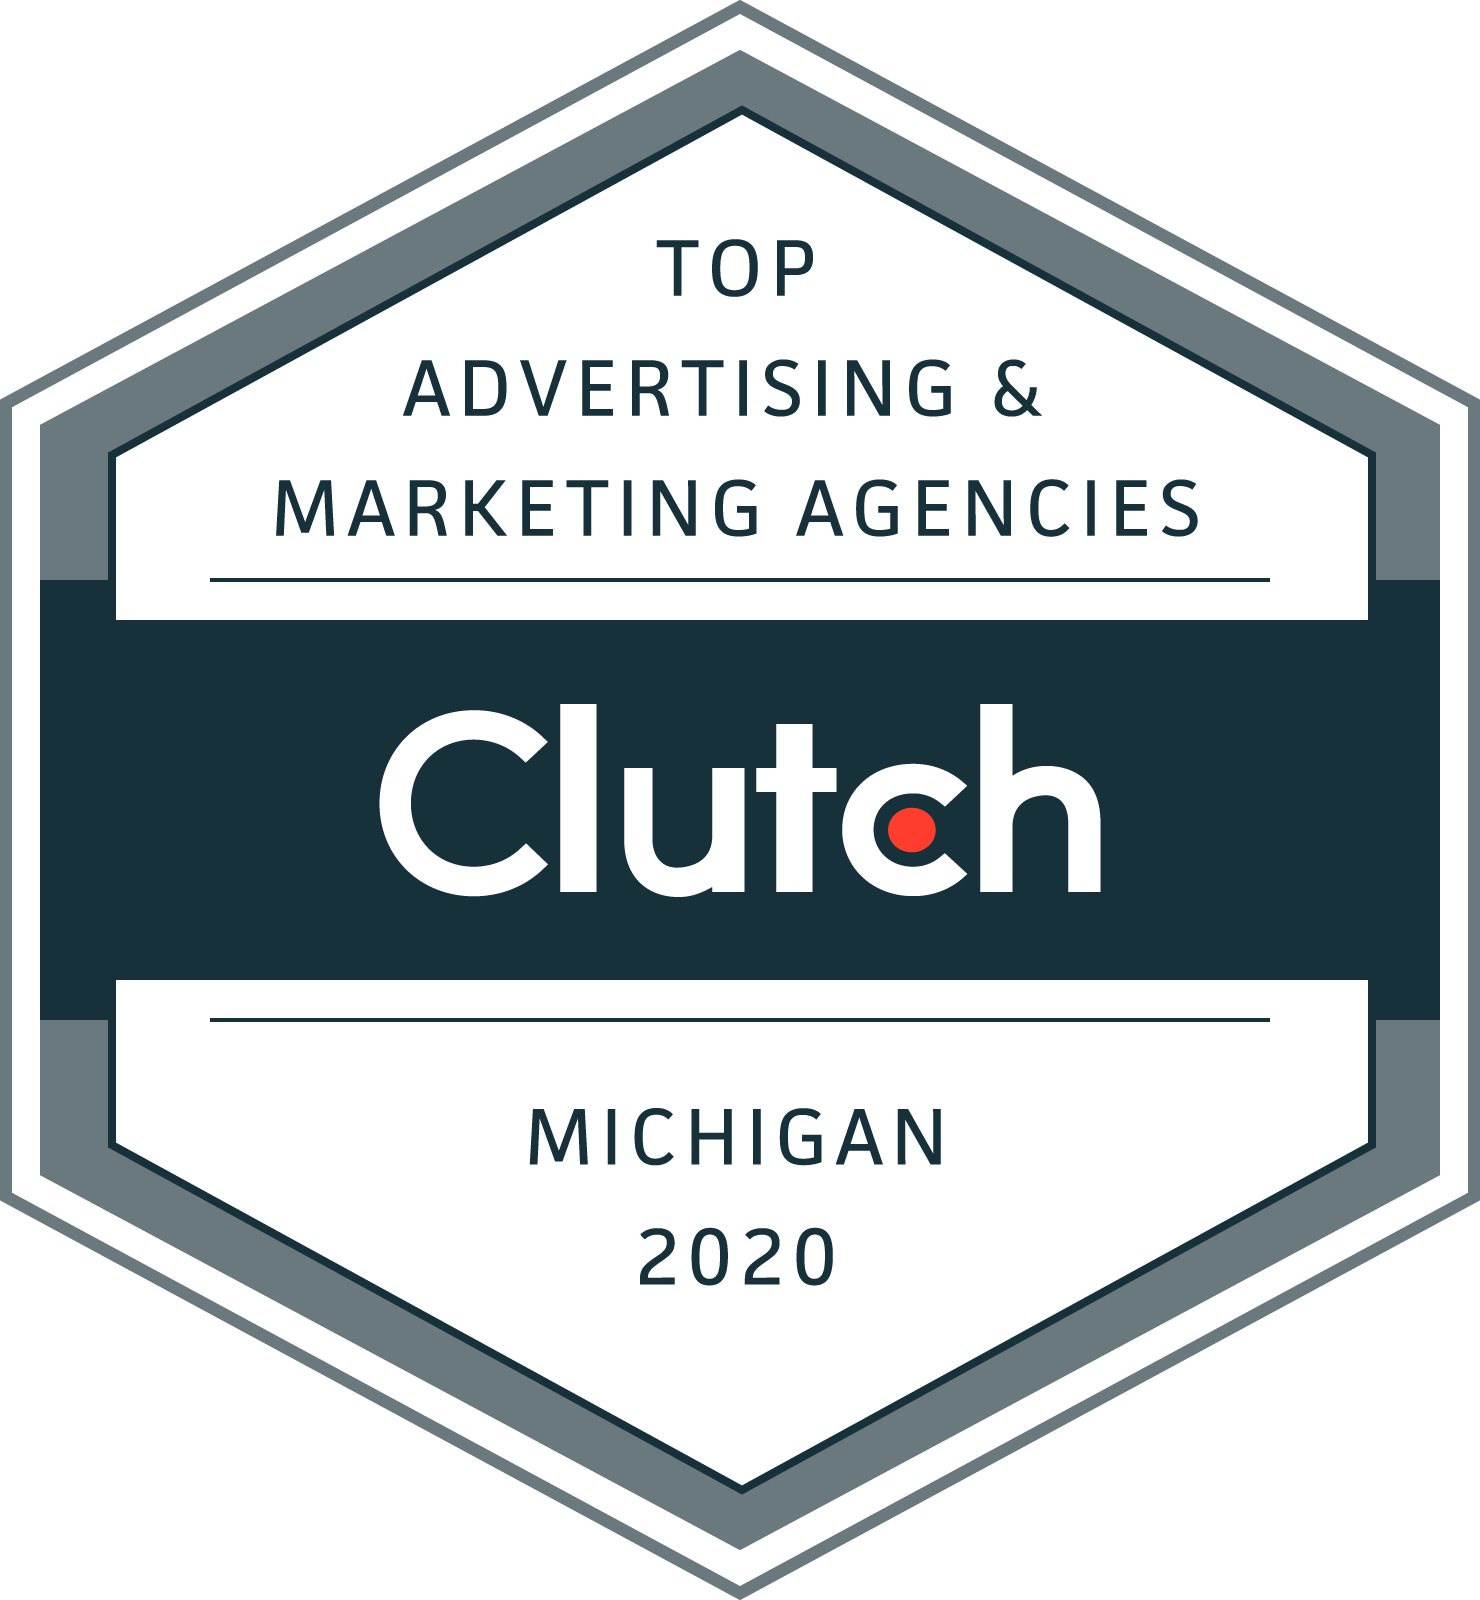 Top Advertising and Marketing Agencies in Michigan 2020 by Clutch